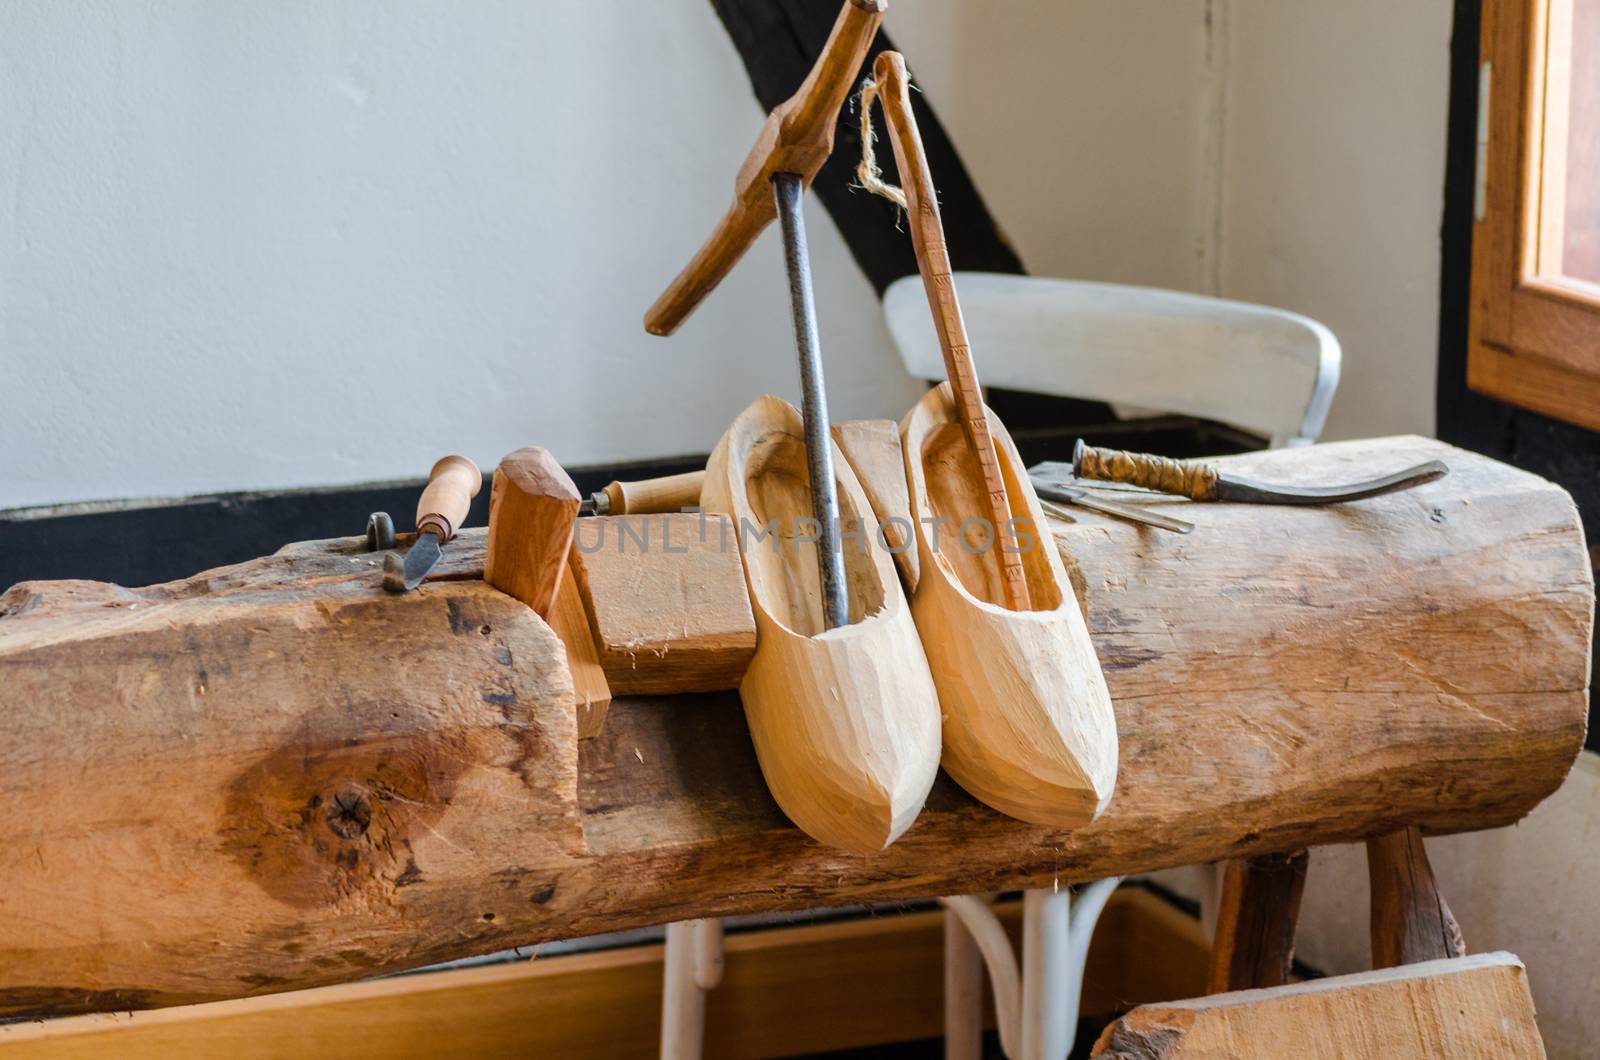 Wooden shoes, clogs production by JFsPic